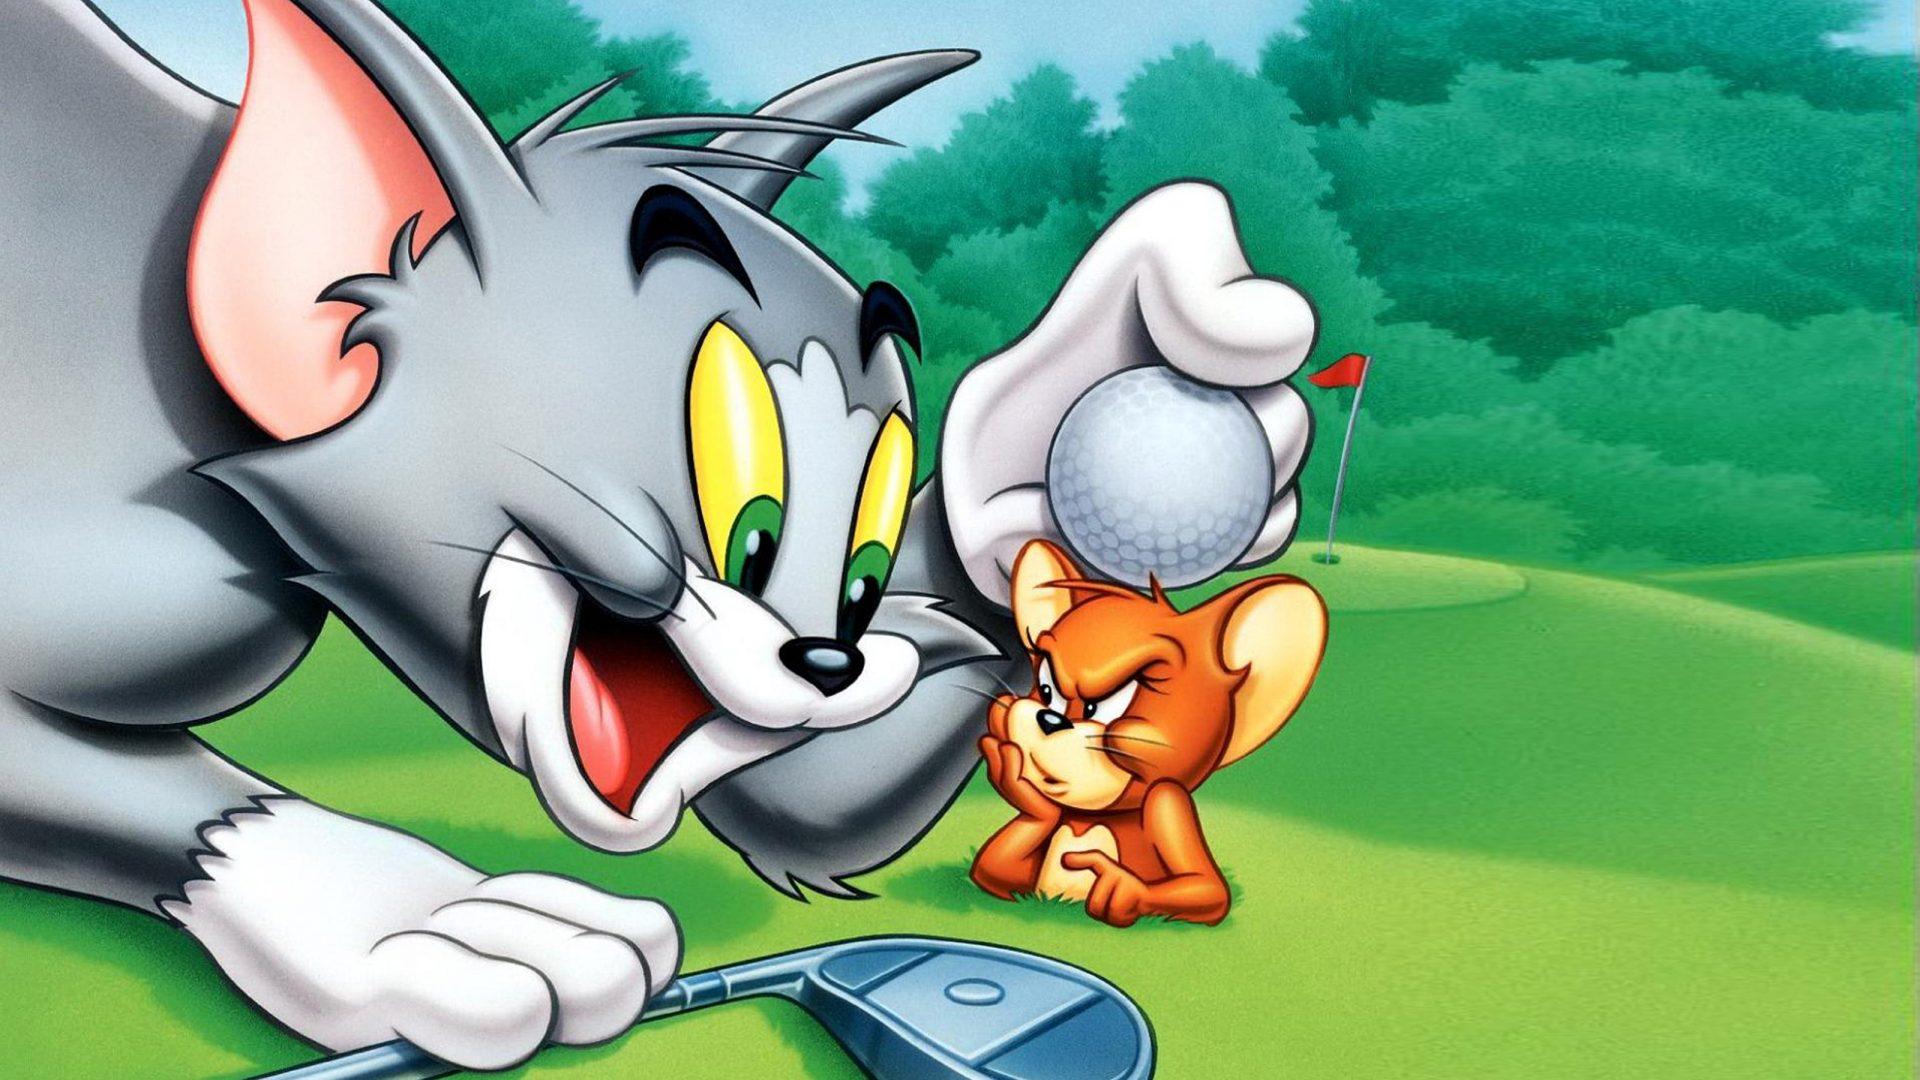 Tom And Jerry Greatests Chases Wallpaper HD For Desktop Full